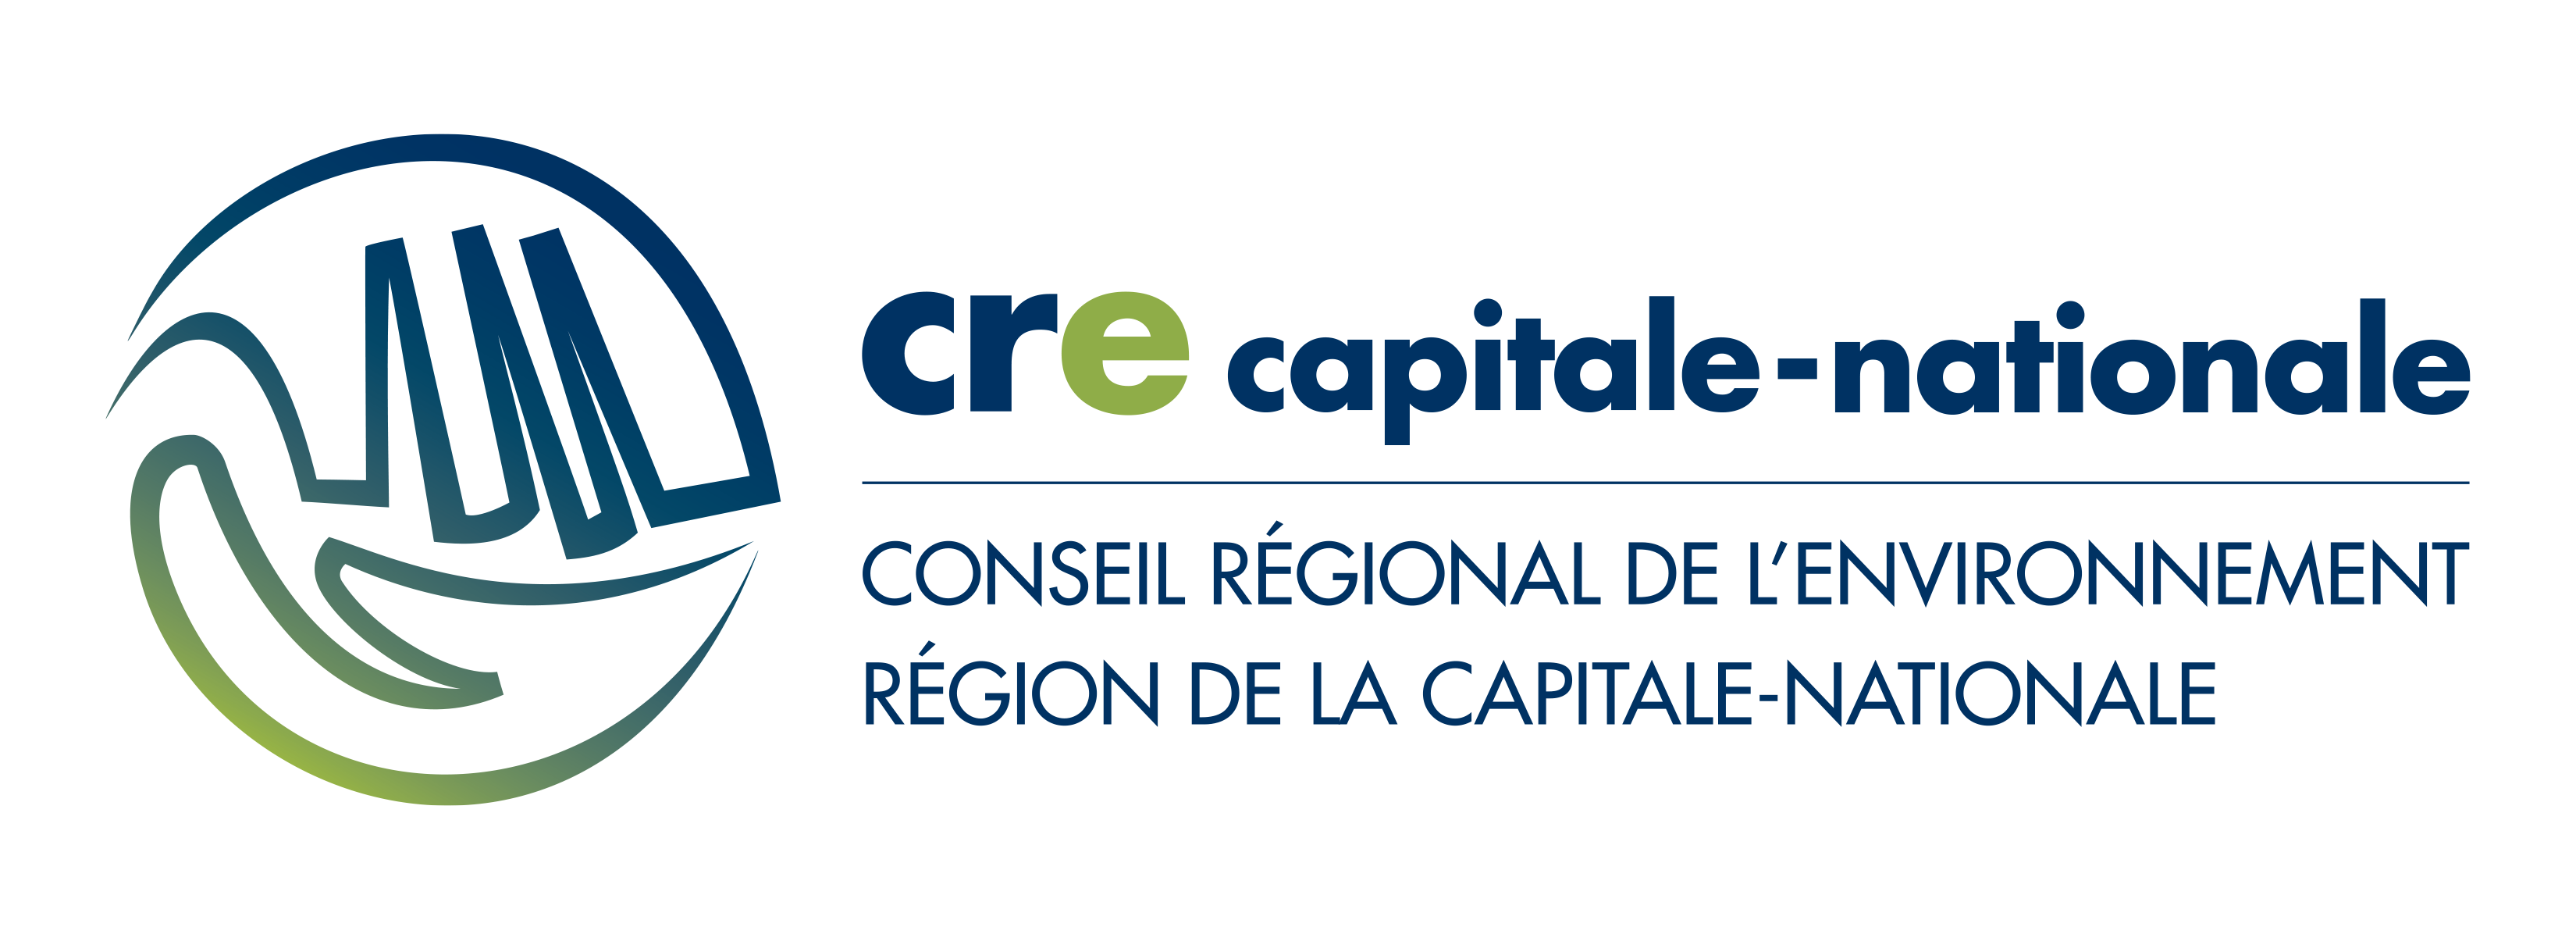 Logo-cre capitale-nationale